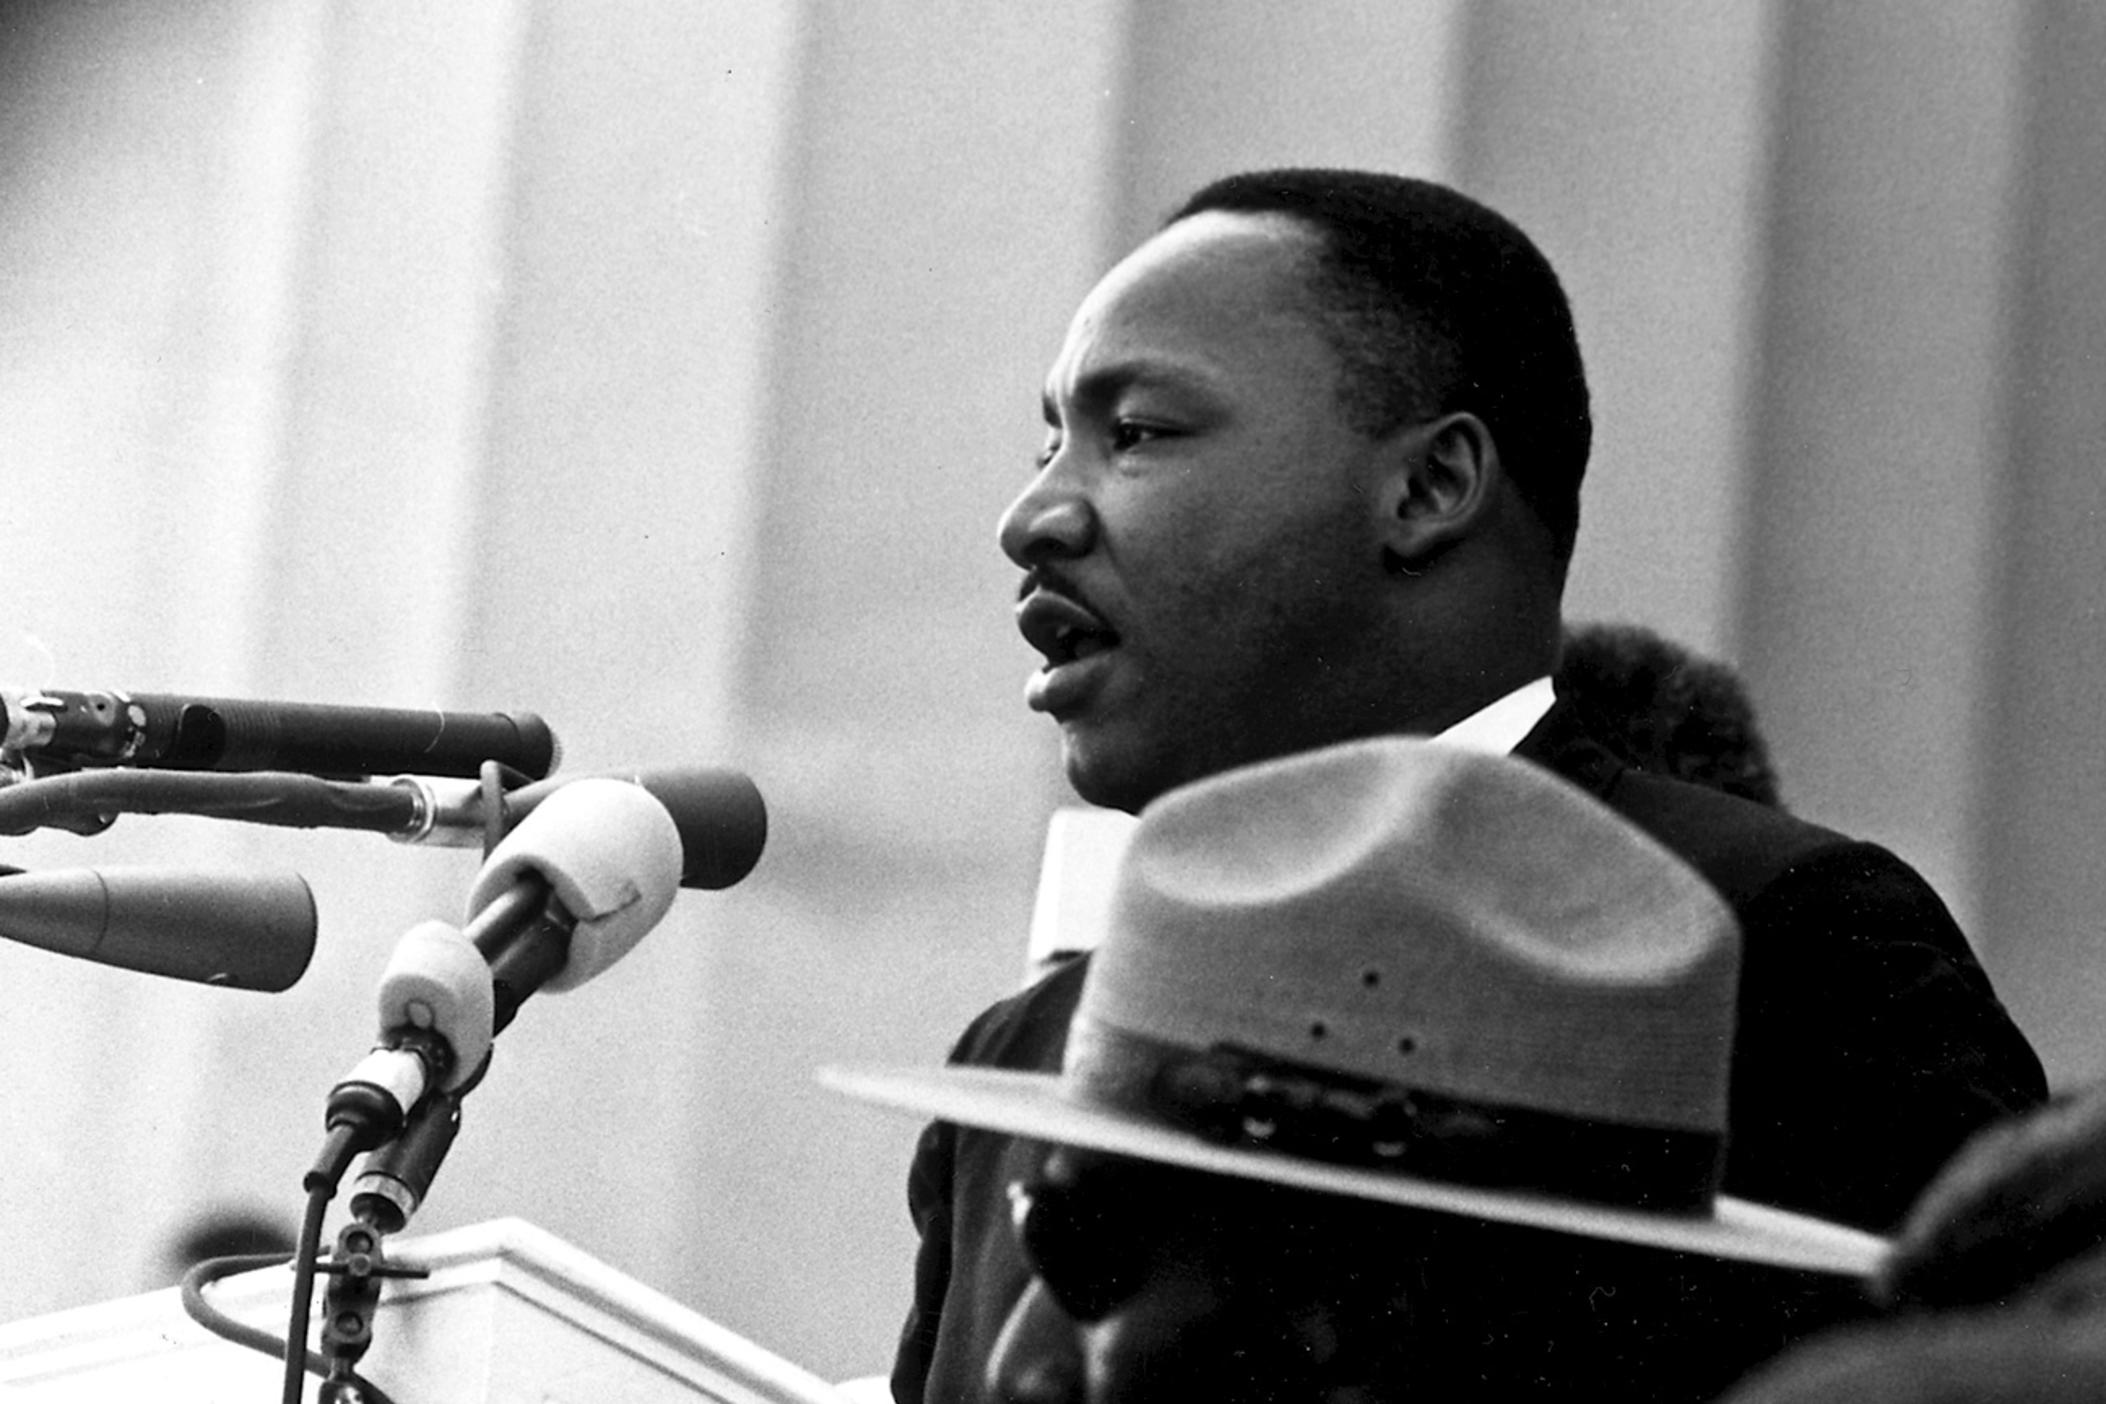 Dr. Martin Luther King Jr. giving his "I Have a Dream" speech during the March on Washington in Washington, D.C., on August 28, 1963.